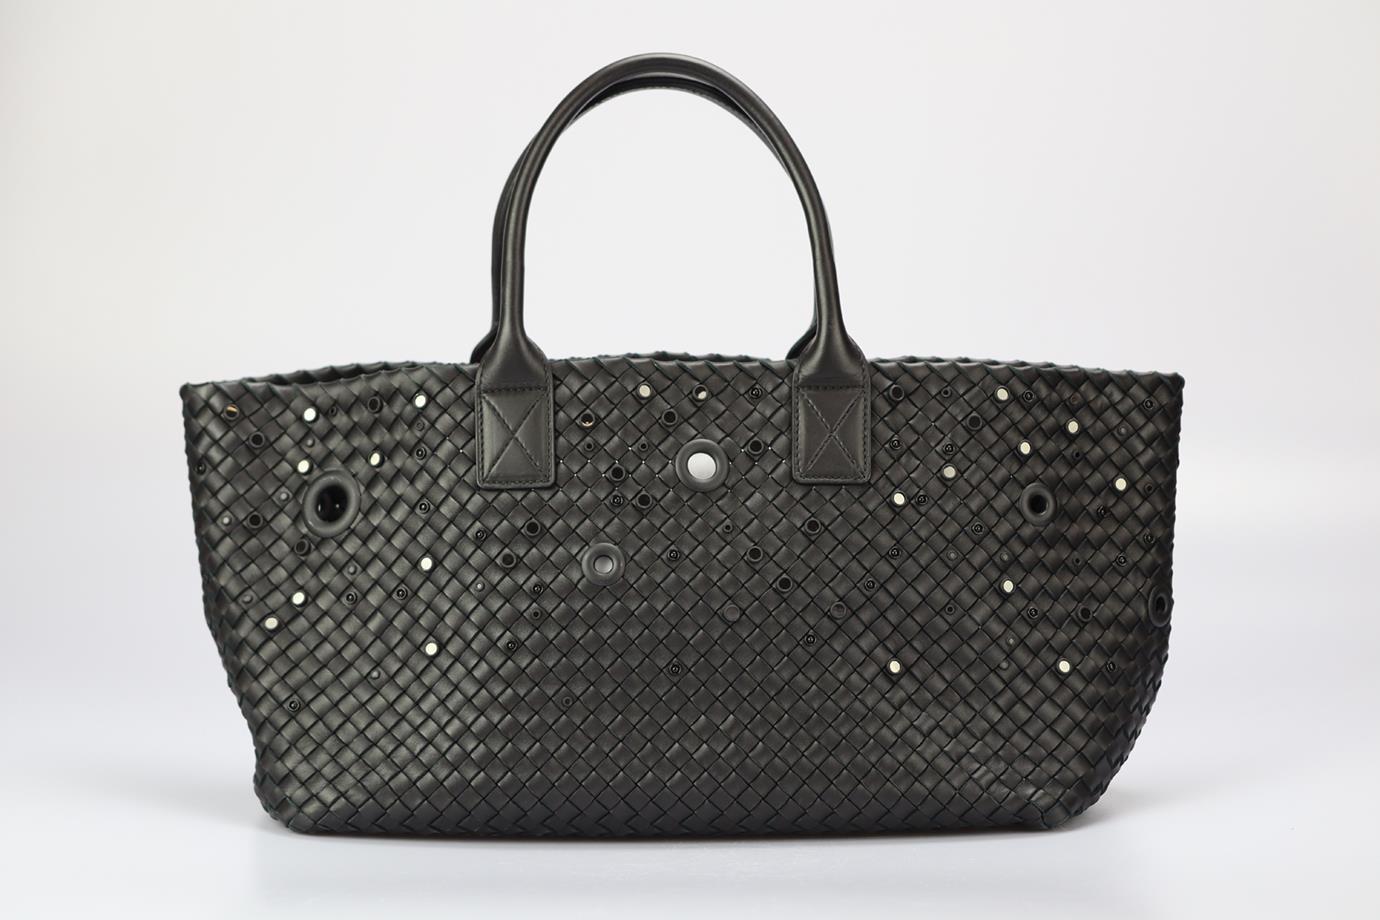 Bottega Veneta Limited Edition Cabat Embellished Intreciato Leather Tote Bag. Black. Open Top. Does not come with - dustbag or box. Height: 9.8 in. Width: 22 in. Depth: 6.5 in. Handle drop: 6.6 in. Condition: Used. Very good condition - Light